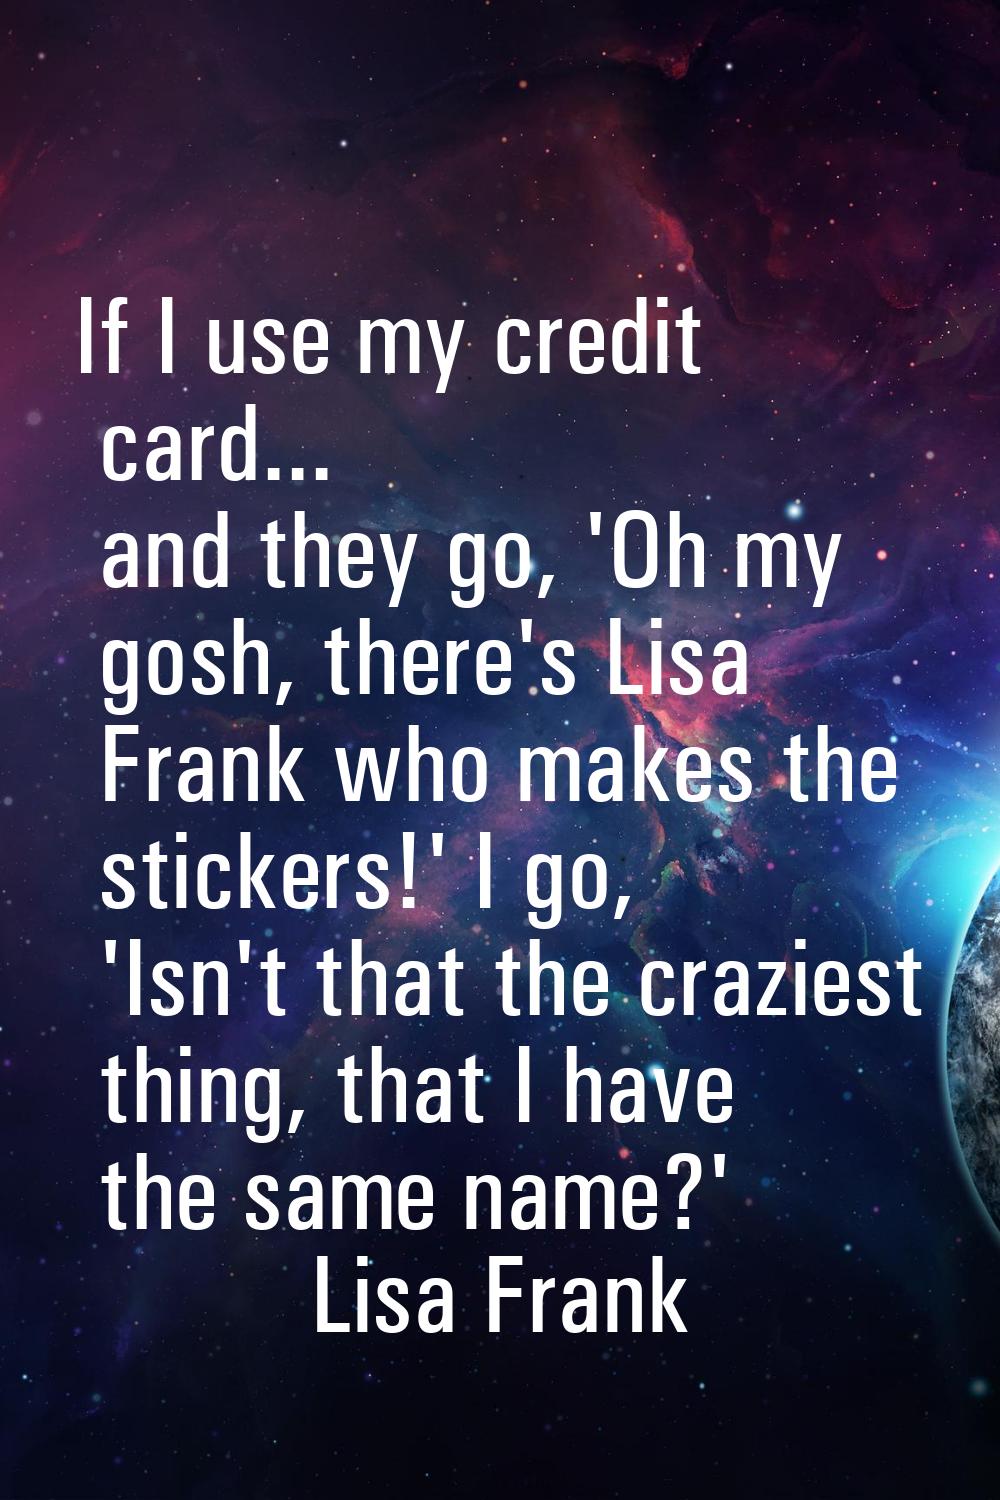 If I use my credit card... and they go, 'Oh my gosh, there's Lisa Frank who makes the stickers!' I 